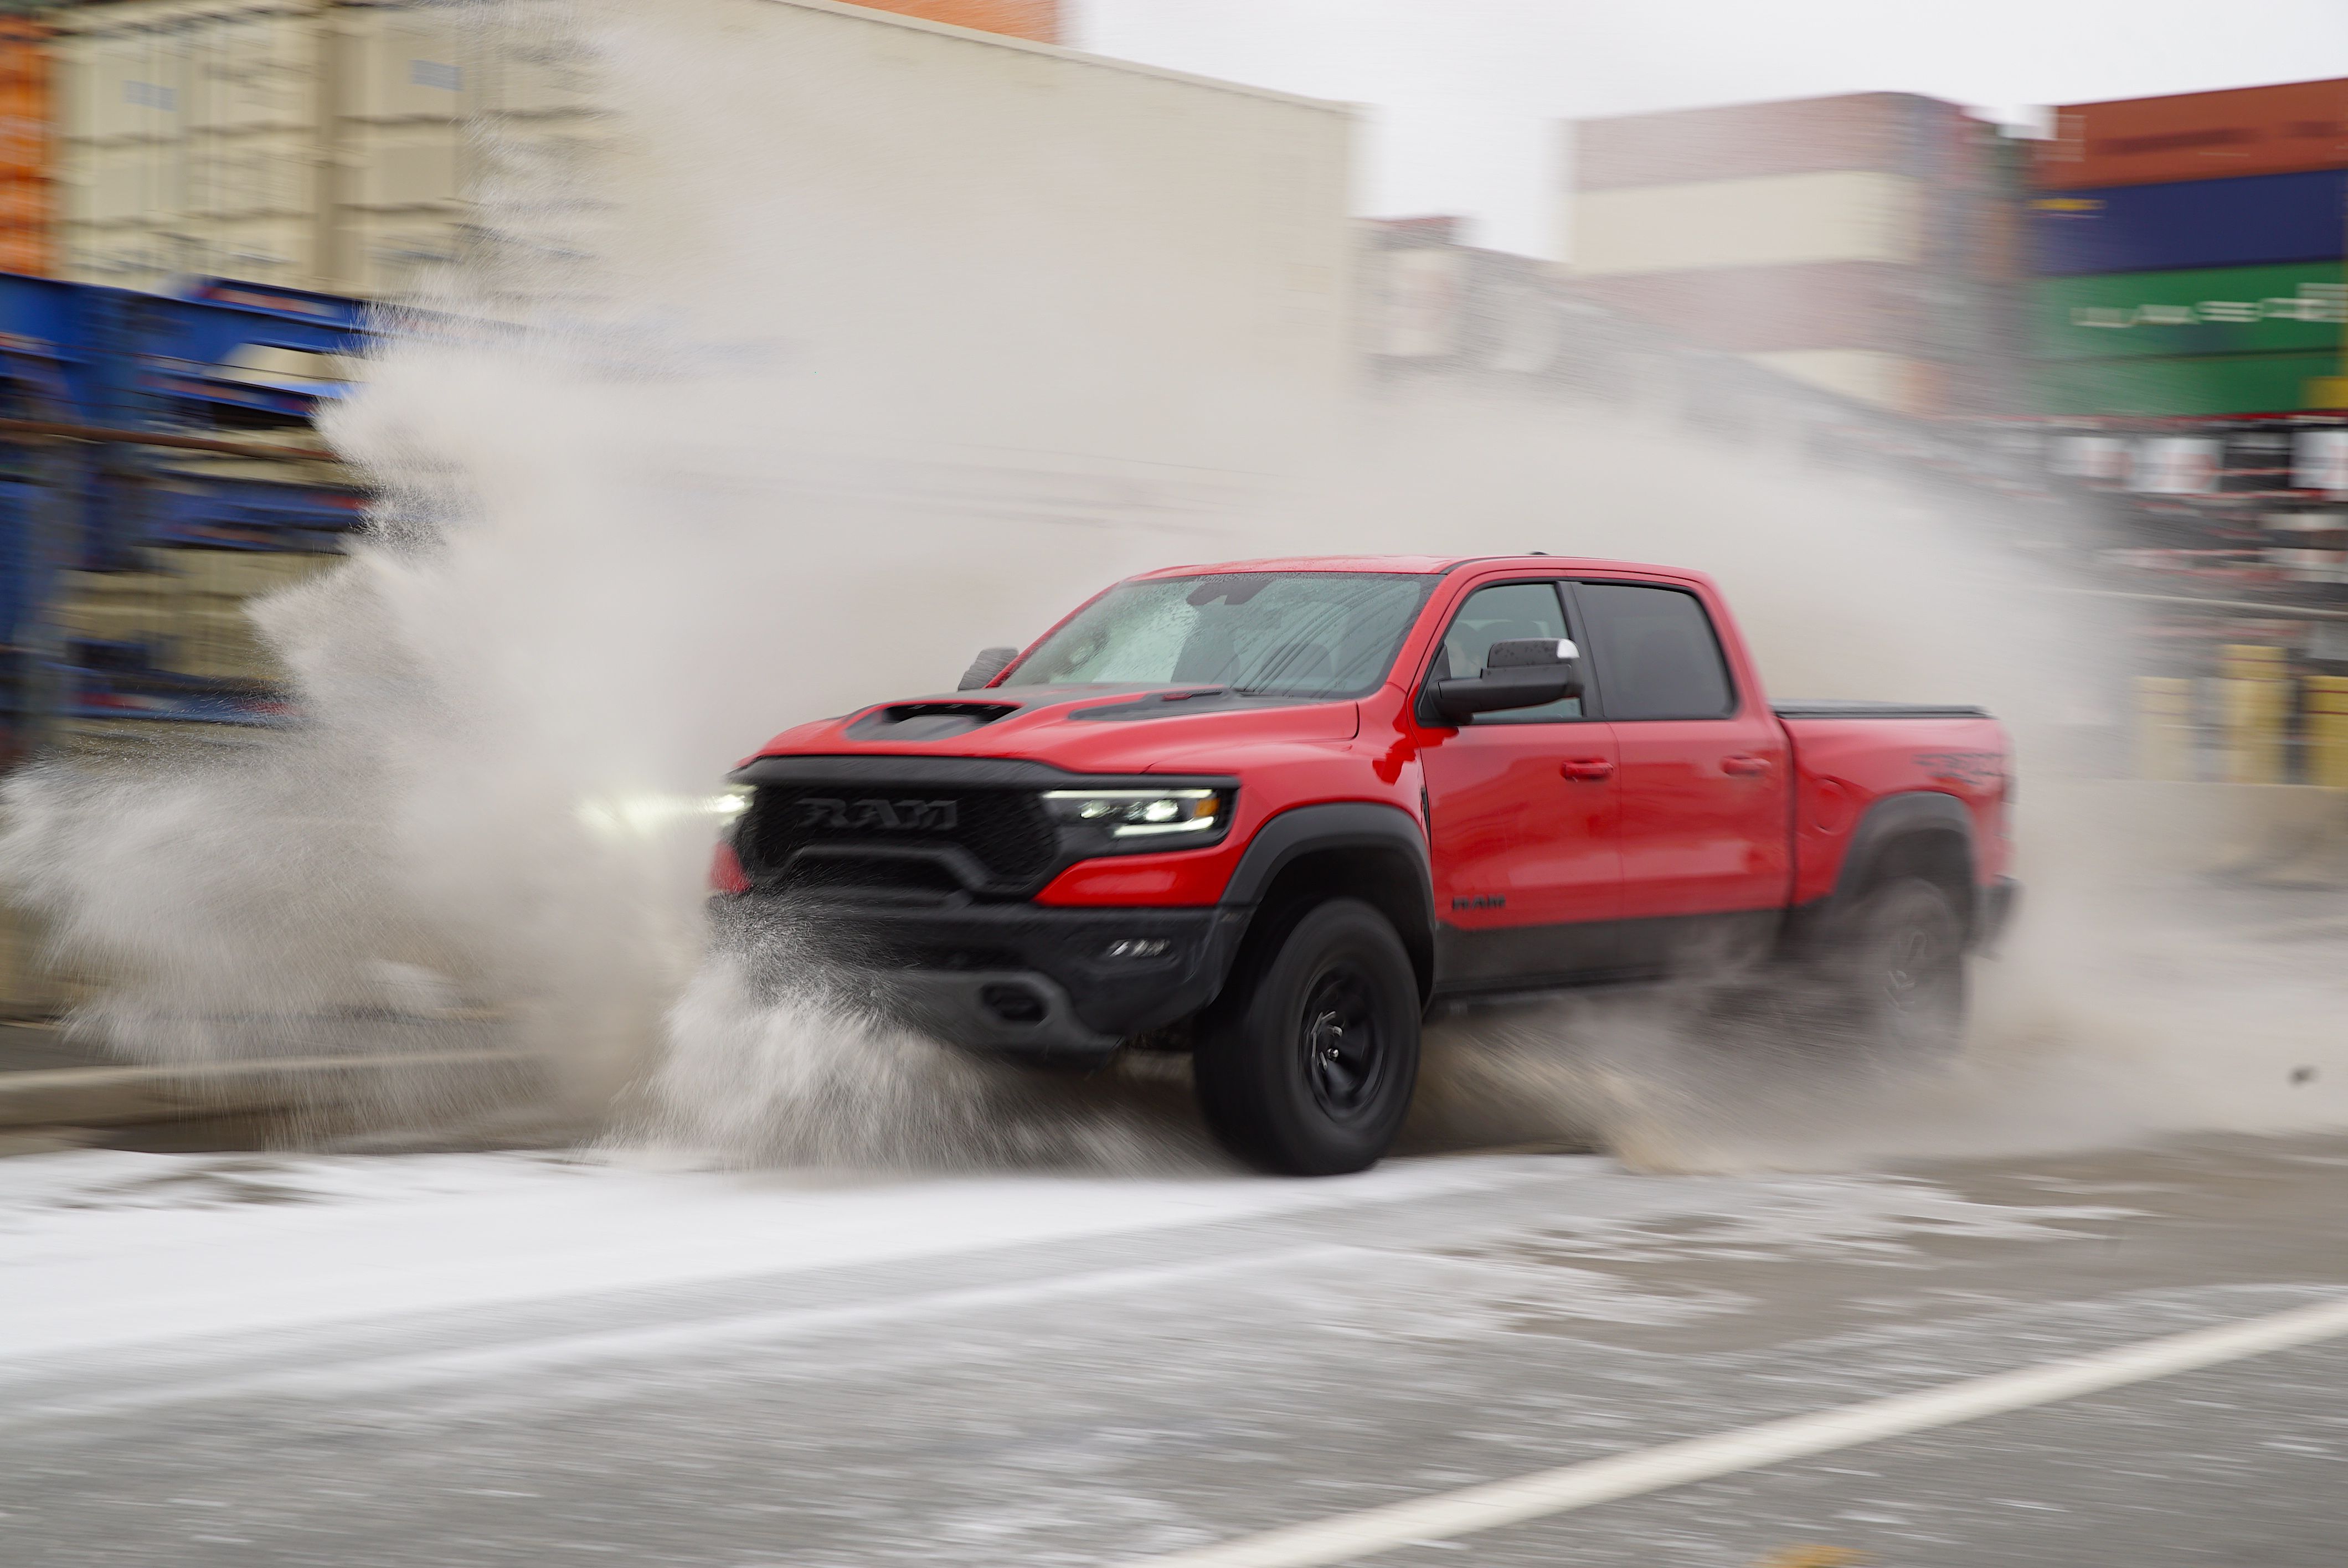 How Much Does the 2022 RAM 1500 Weigh?